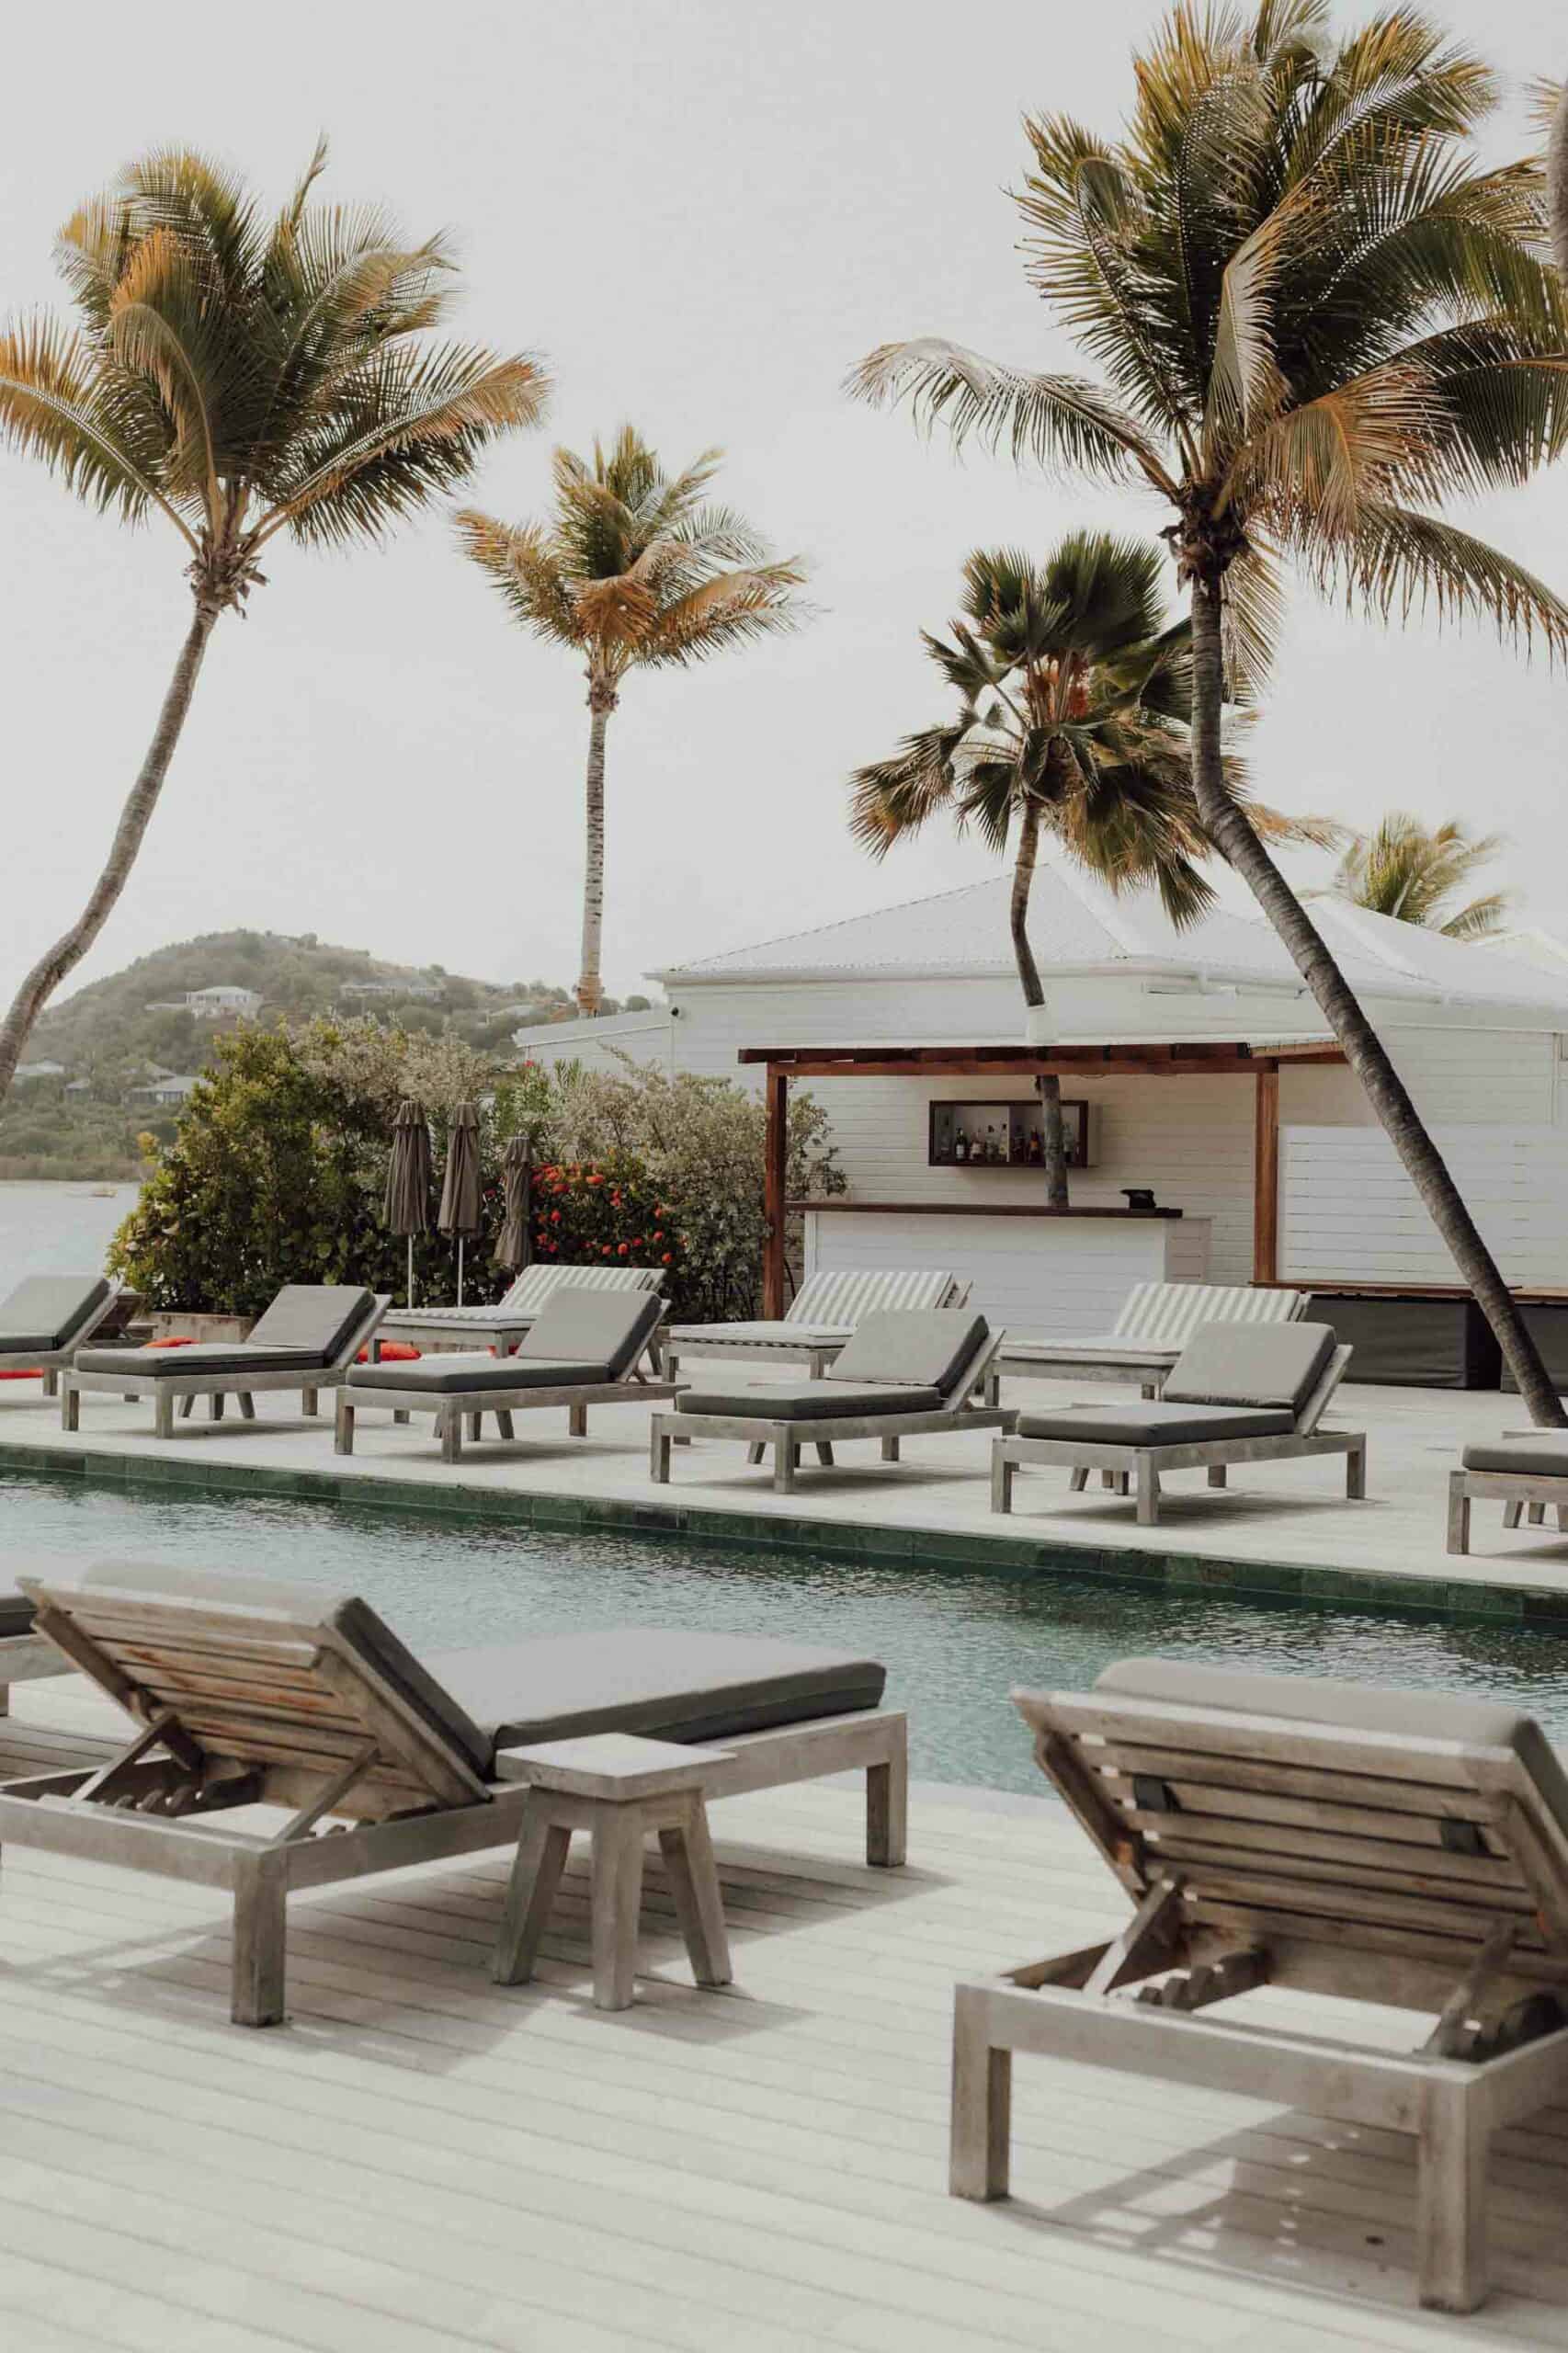 The Ultimate Guide to St Barths - Jetset